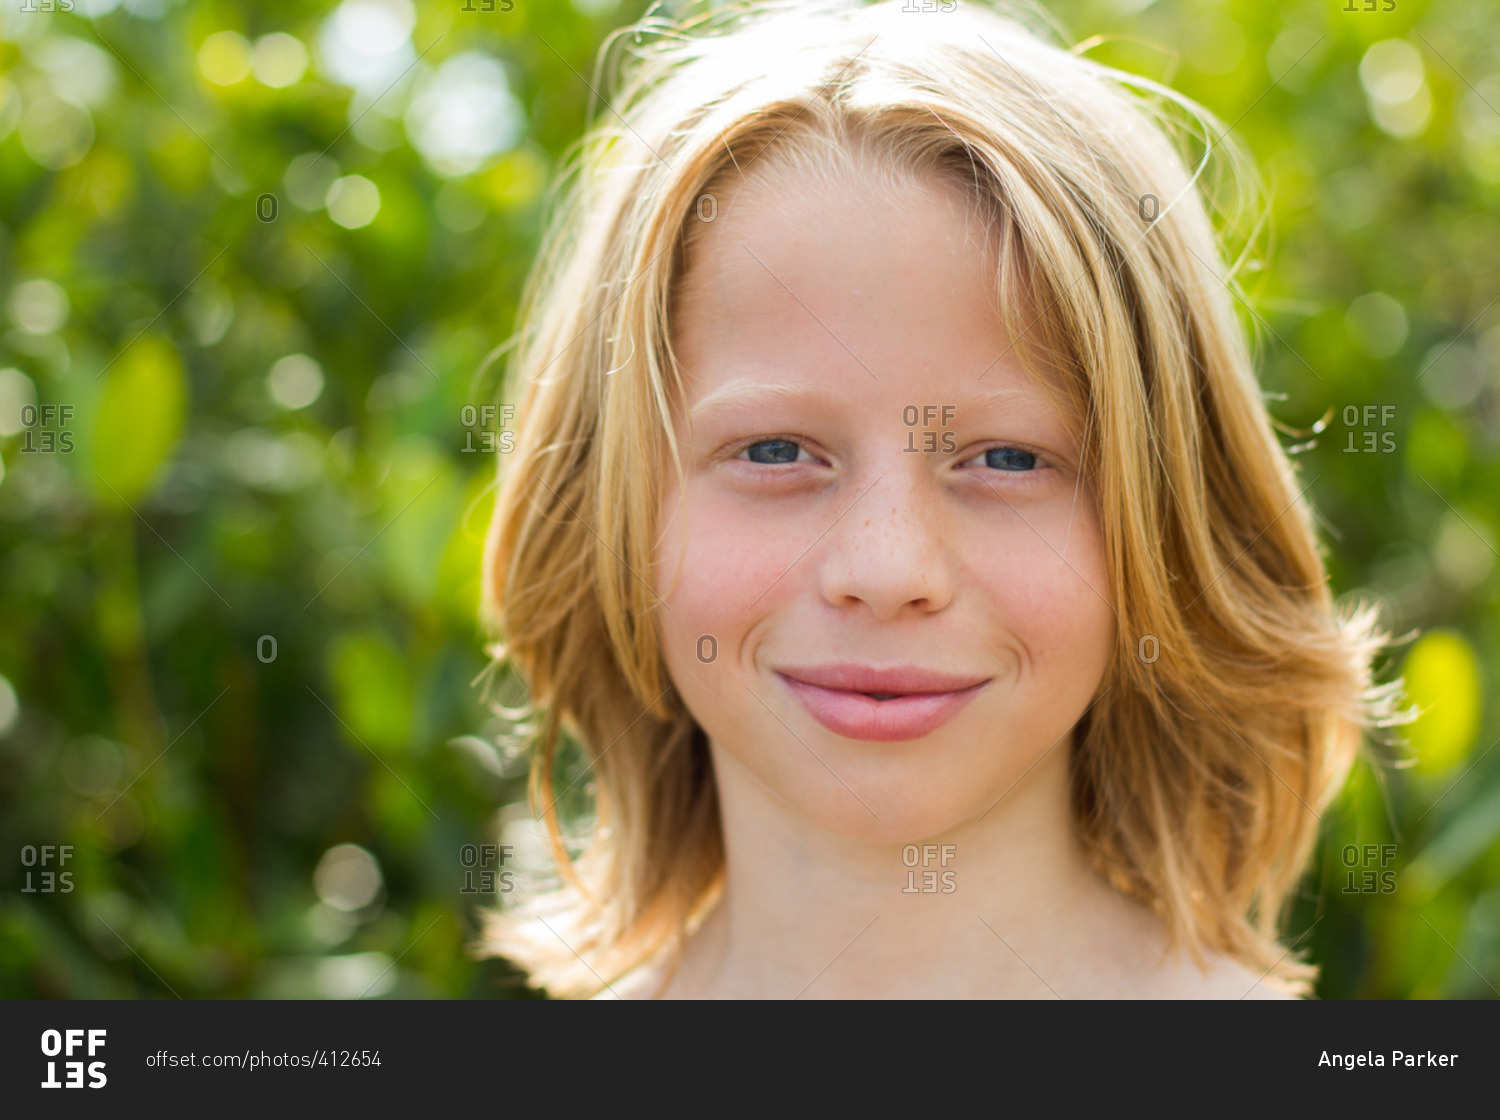 Headshot of boy with long hair stock photo - OFFSET